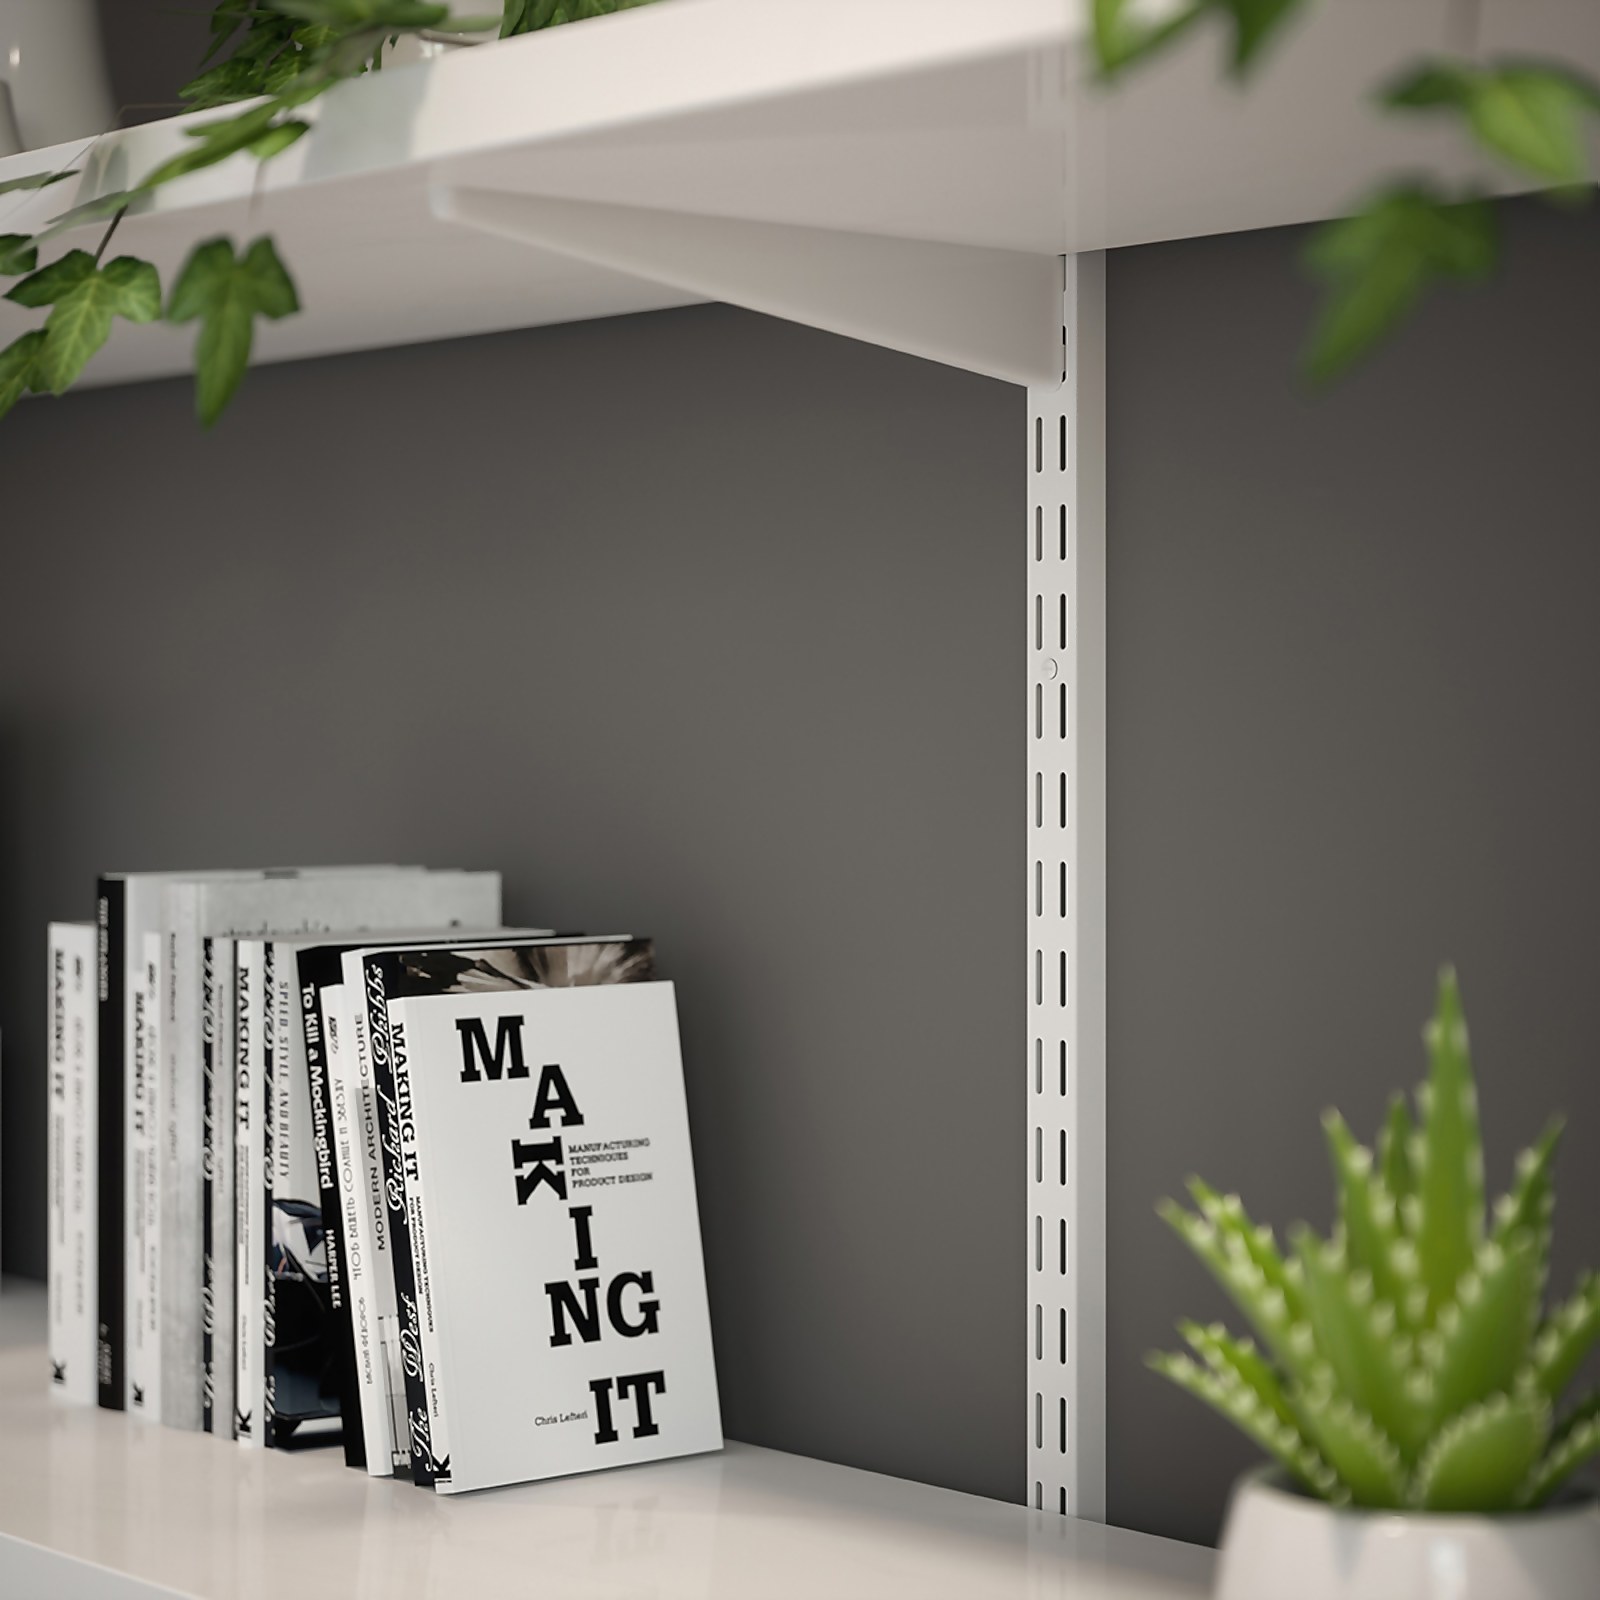 Photo of Anti-bacterial Twin Slot Shelving Kit - 1600mm White Twinslot And 320mm Brackets - White